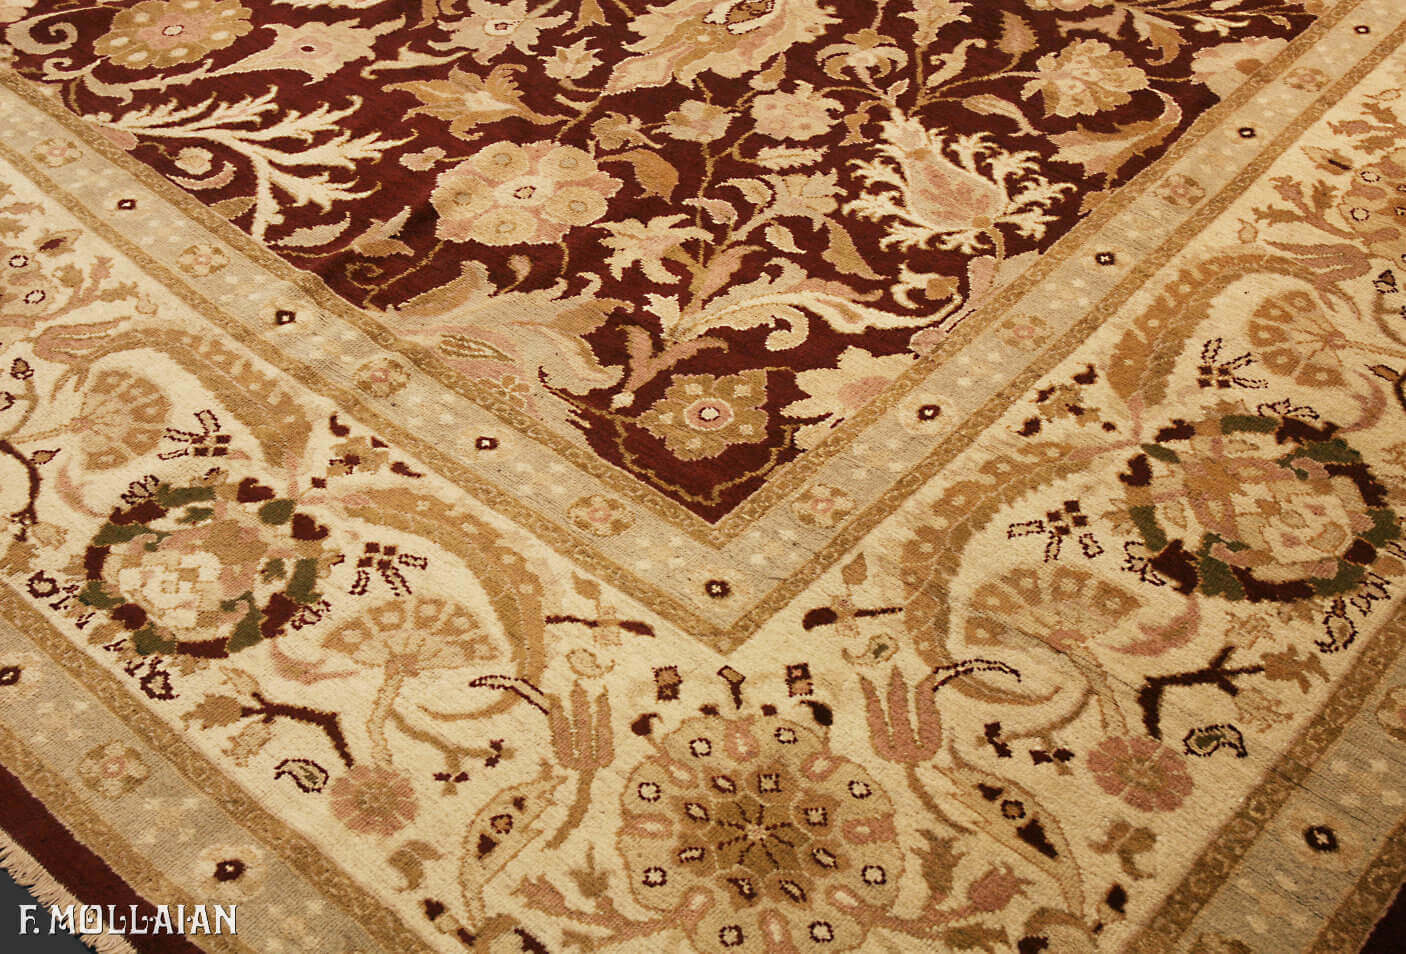 A Very Large Antique Indian Amirstar Carpet n°:31833219